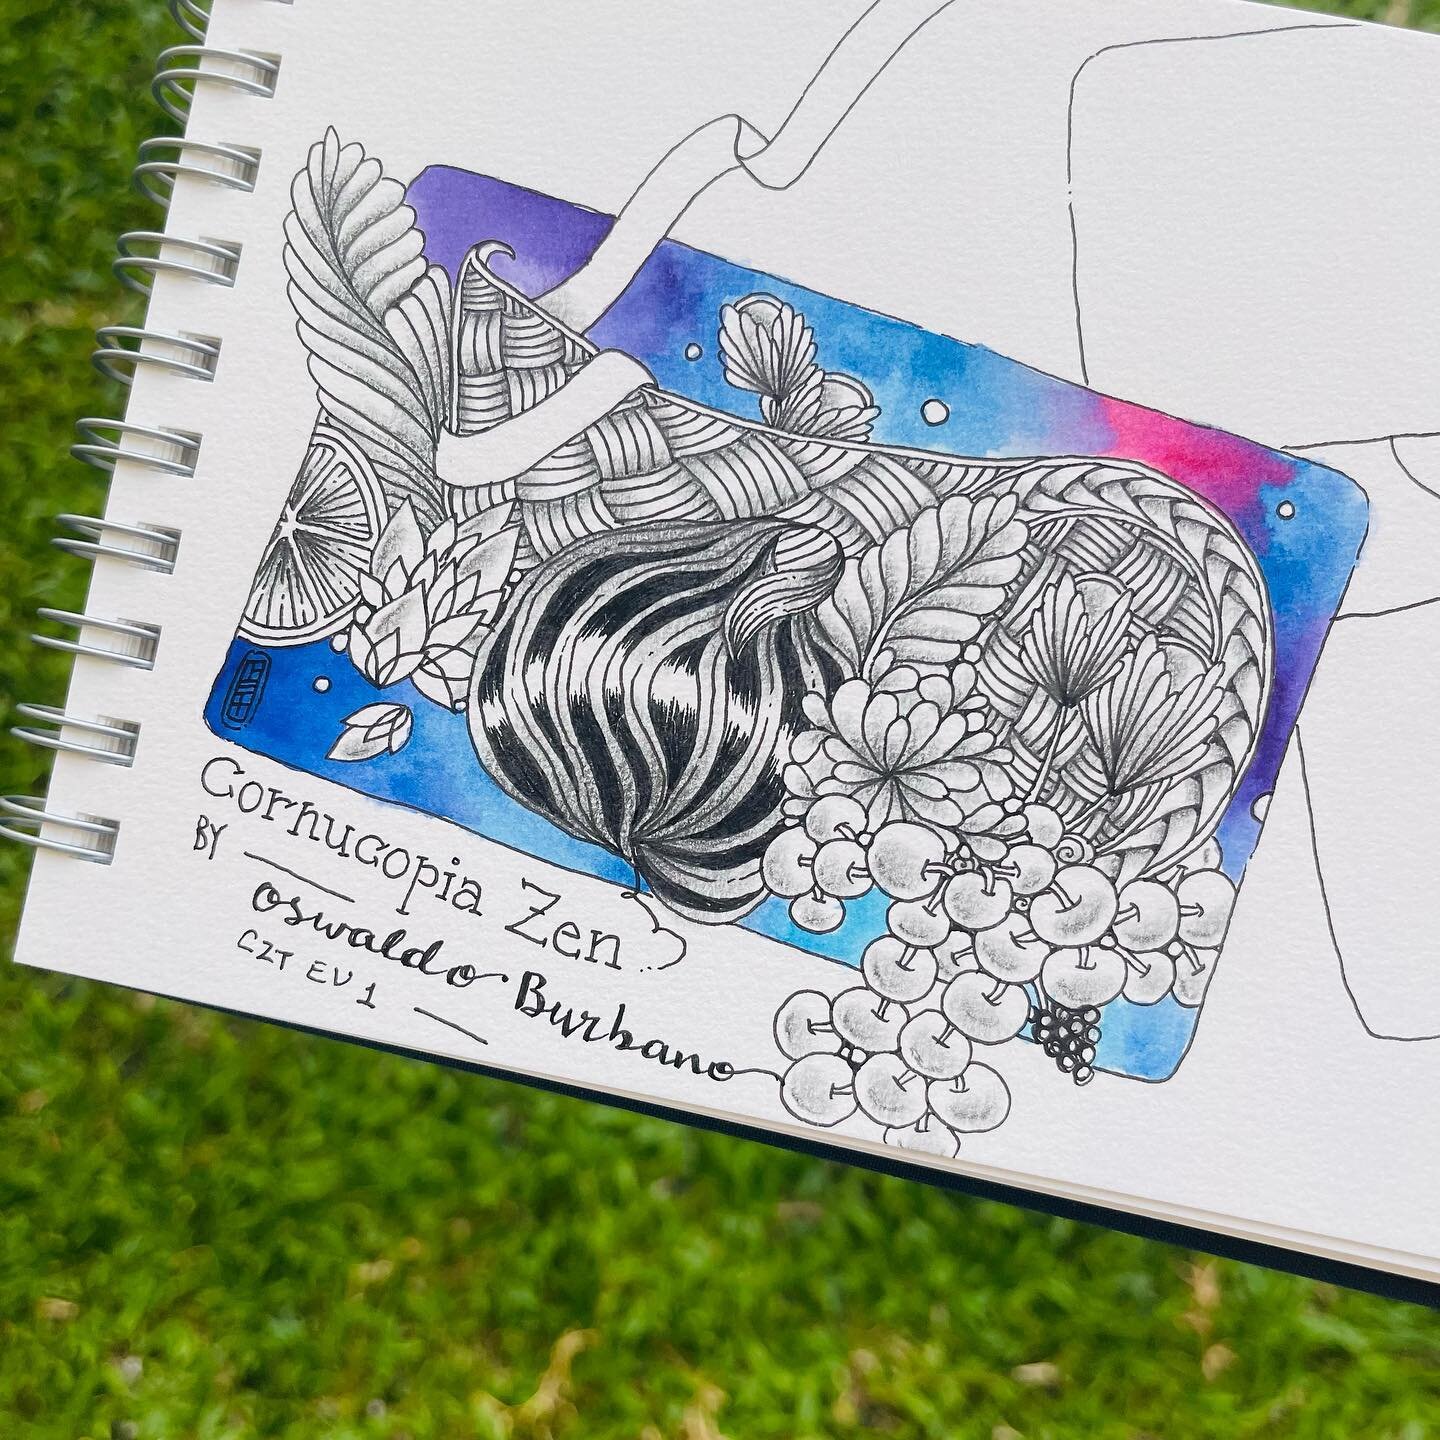 Here&rsquo;s my sketchbook page of Oswaldo Burbano Sandoval&rsquo;s ( @soyosczt ) class, &ldquo;Cornucopia Zen&rdquo;! I thought it&rsquo;d be fun to do it in a sketchbook and have some of the tangling elements spill out of the tile frame.

#cztae #c